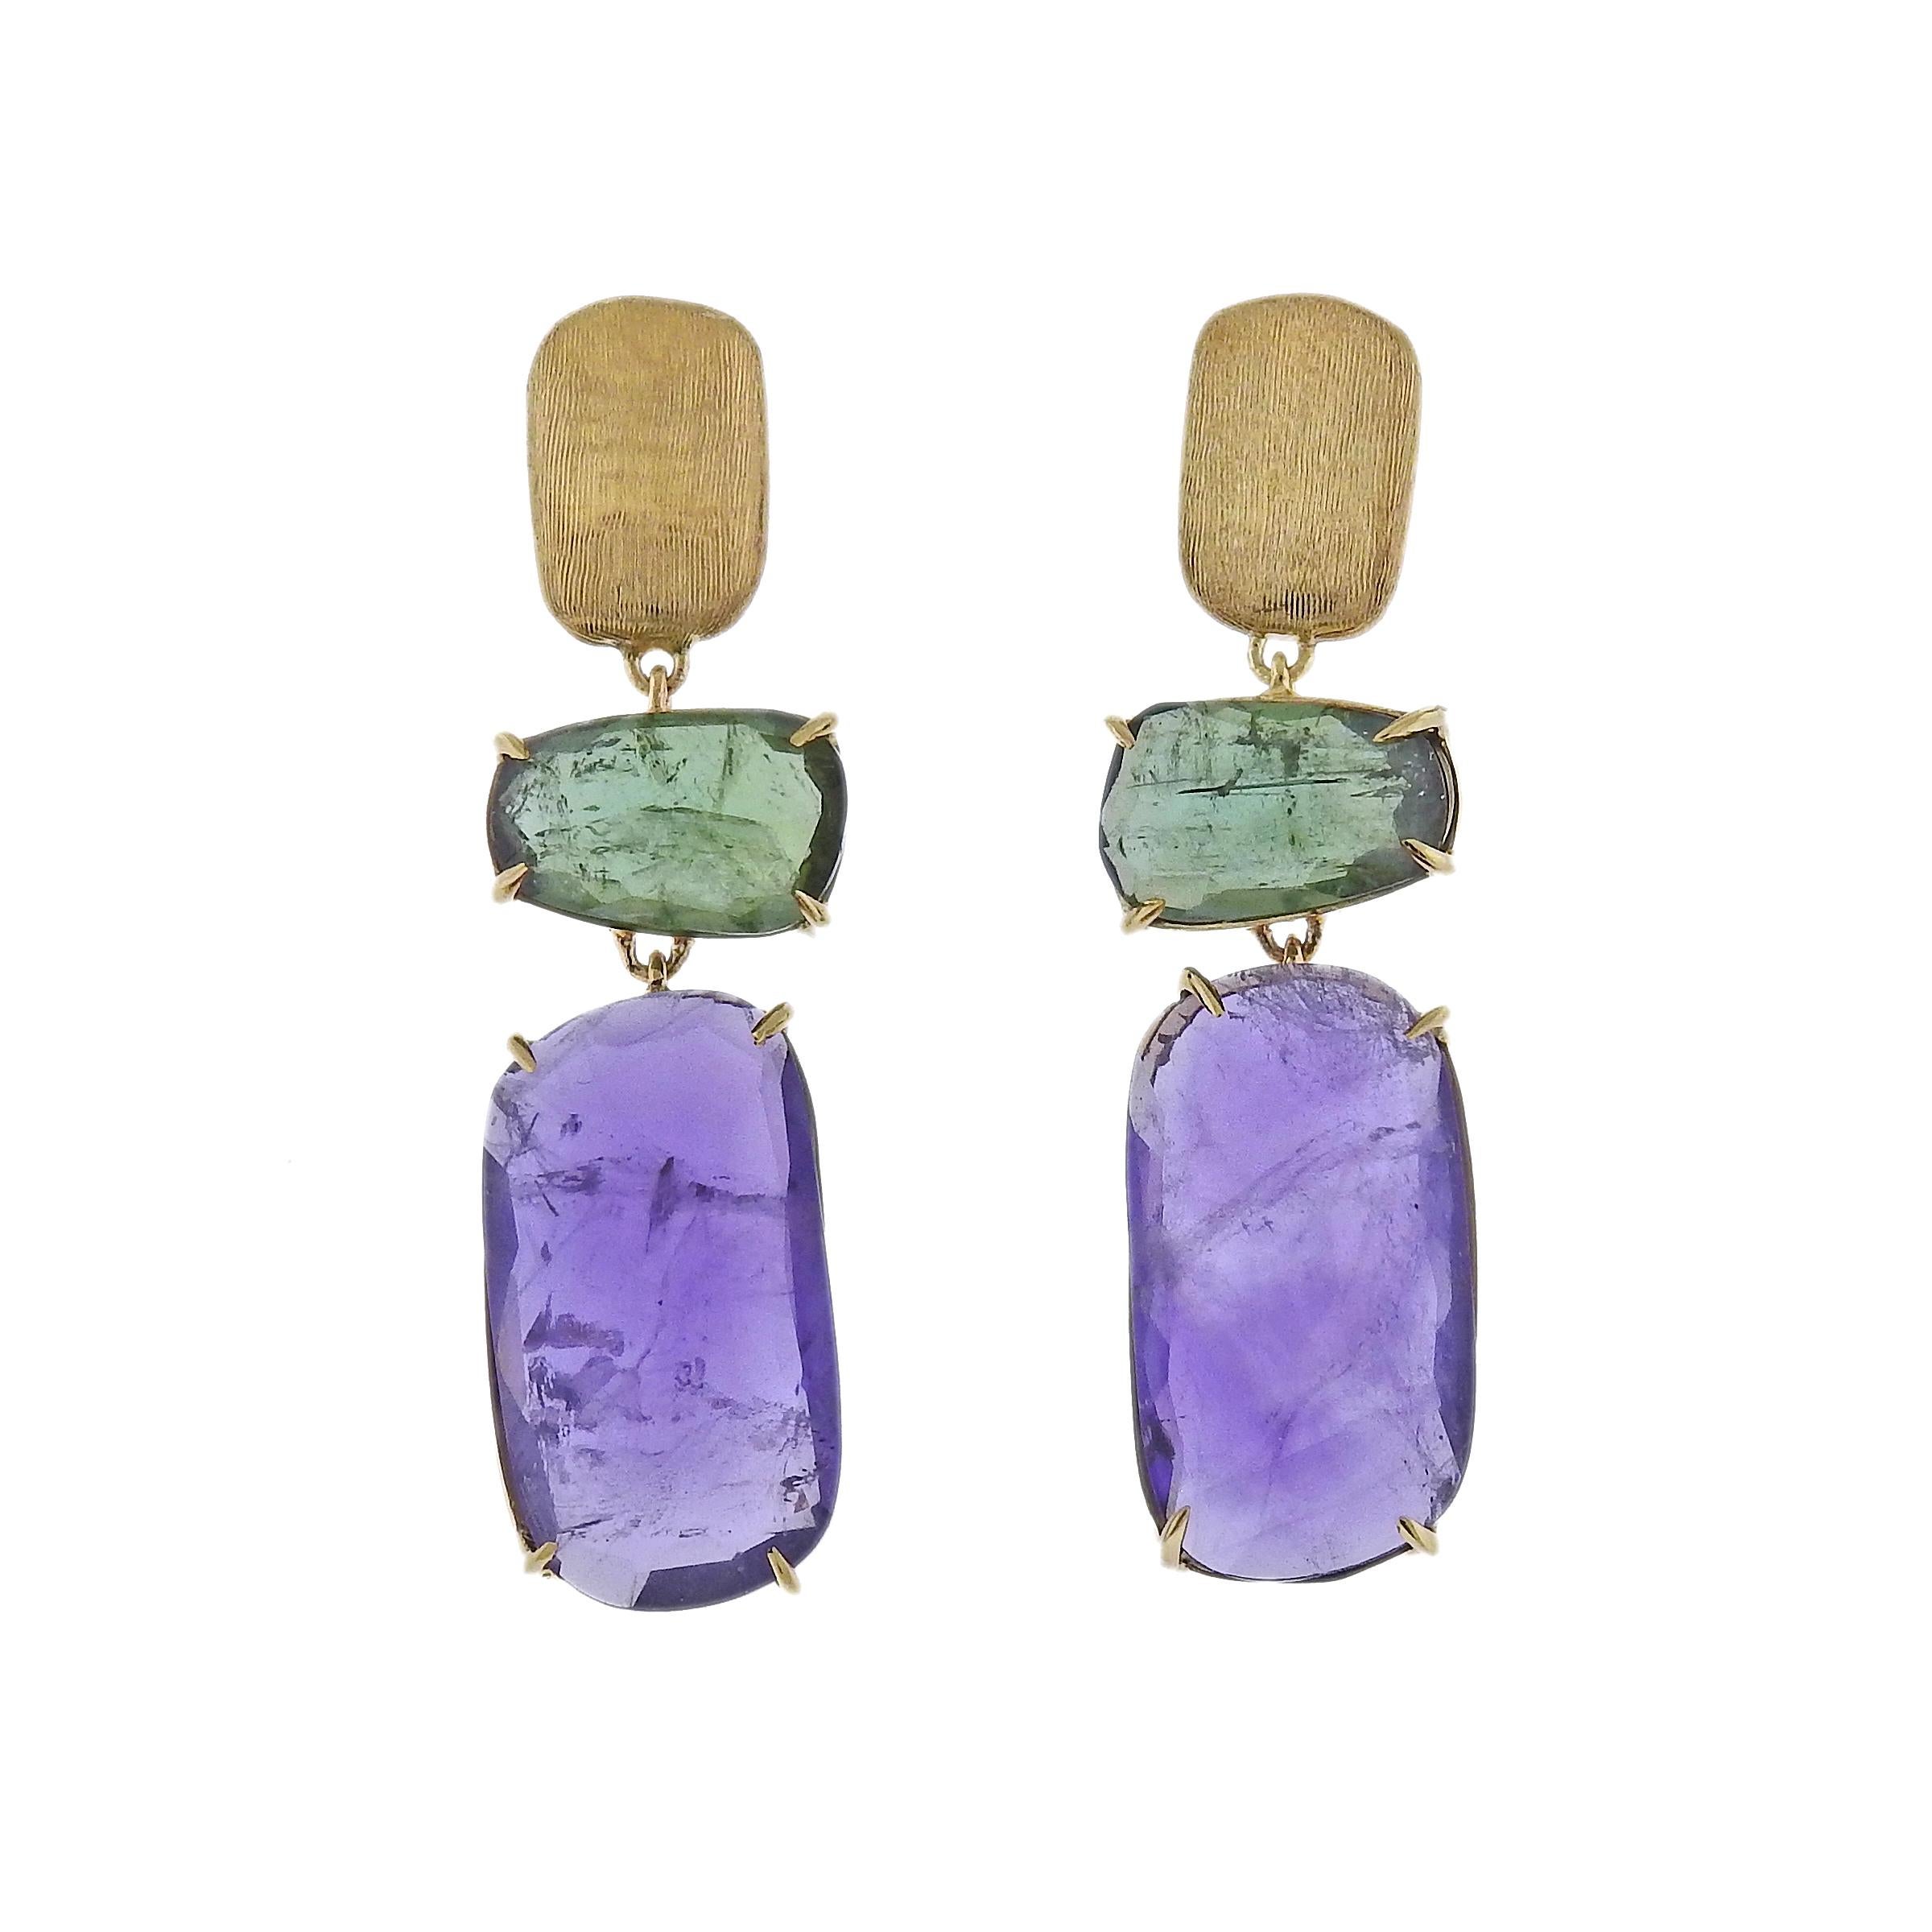 Marco Bicego Murano collection 18K yellow gold drop earrings, set with amethyst and green tourmaline gemstones. Earrings measure 45mm long and 9mm at the widest point. Marked: Marco Bicego, Made In Italy, 750. weight is 6.8 grams. 